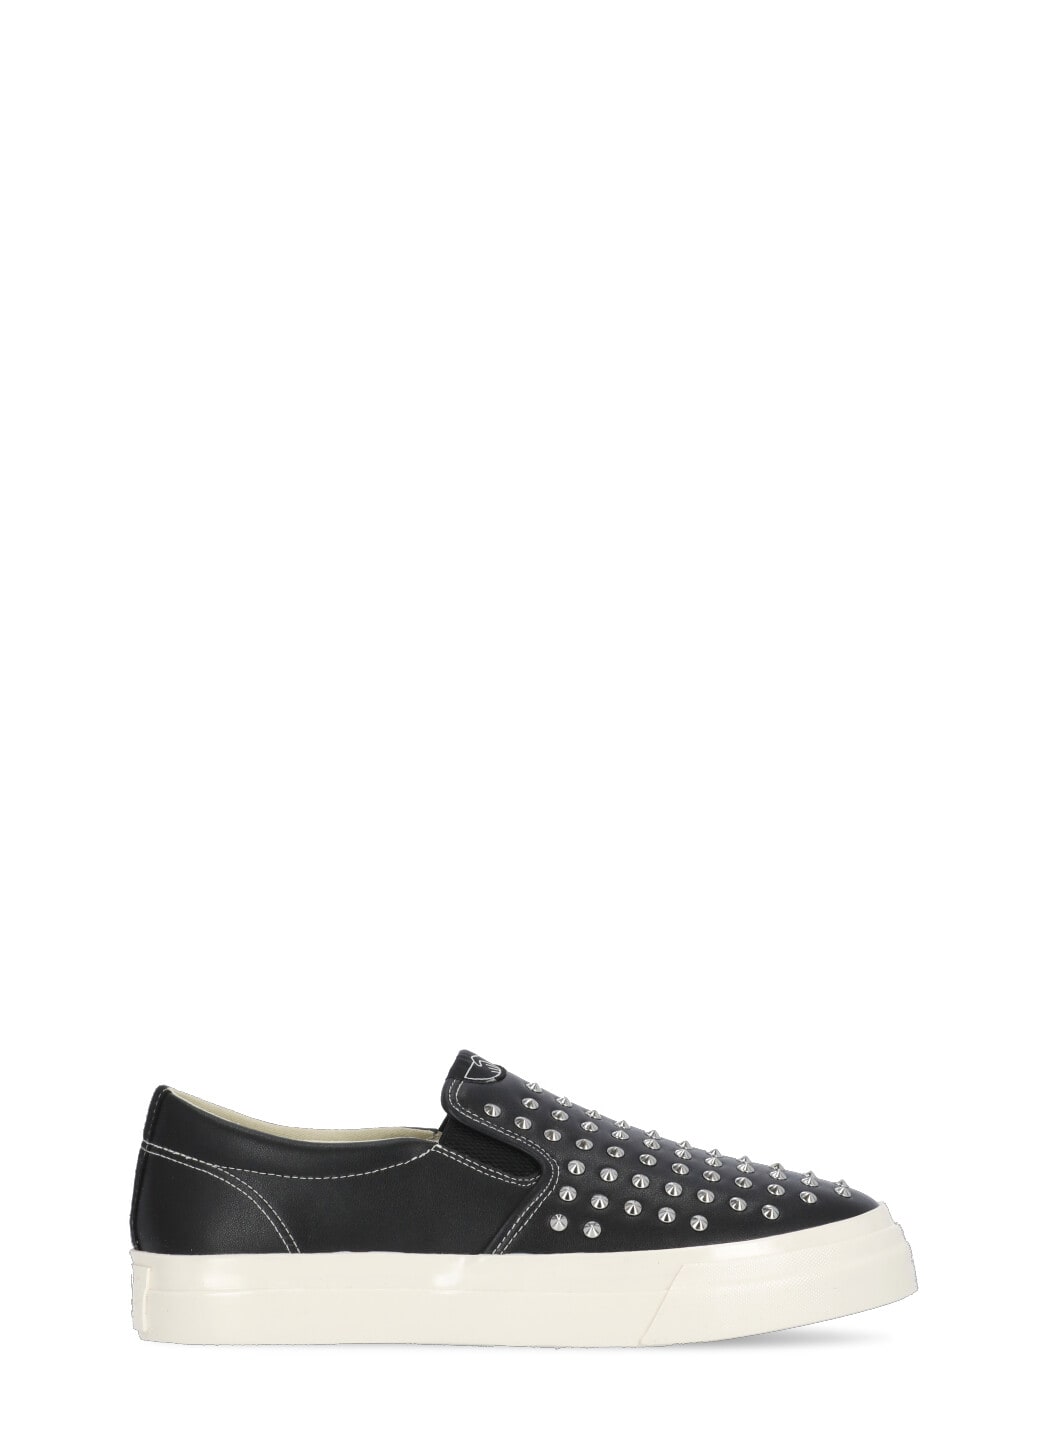 JUNYA WATANABE LOAFERS WITH STUDS